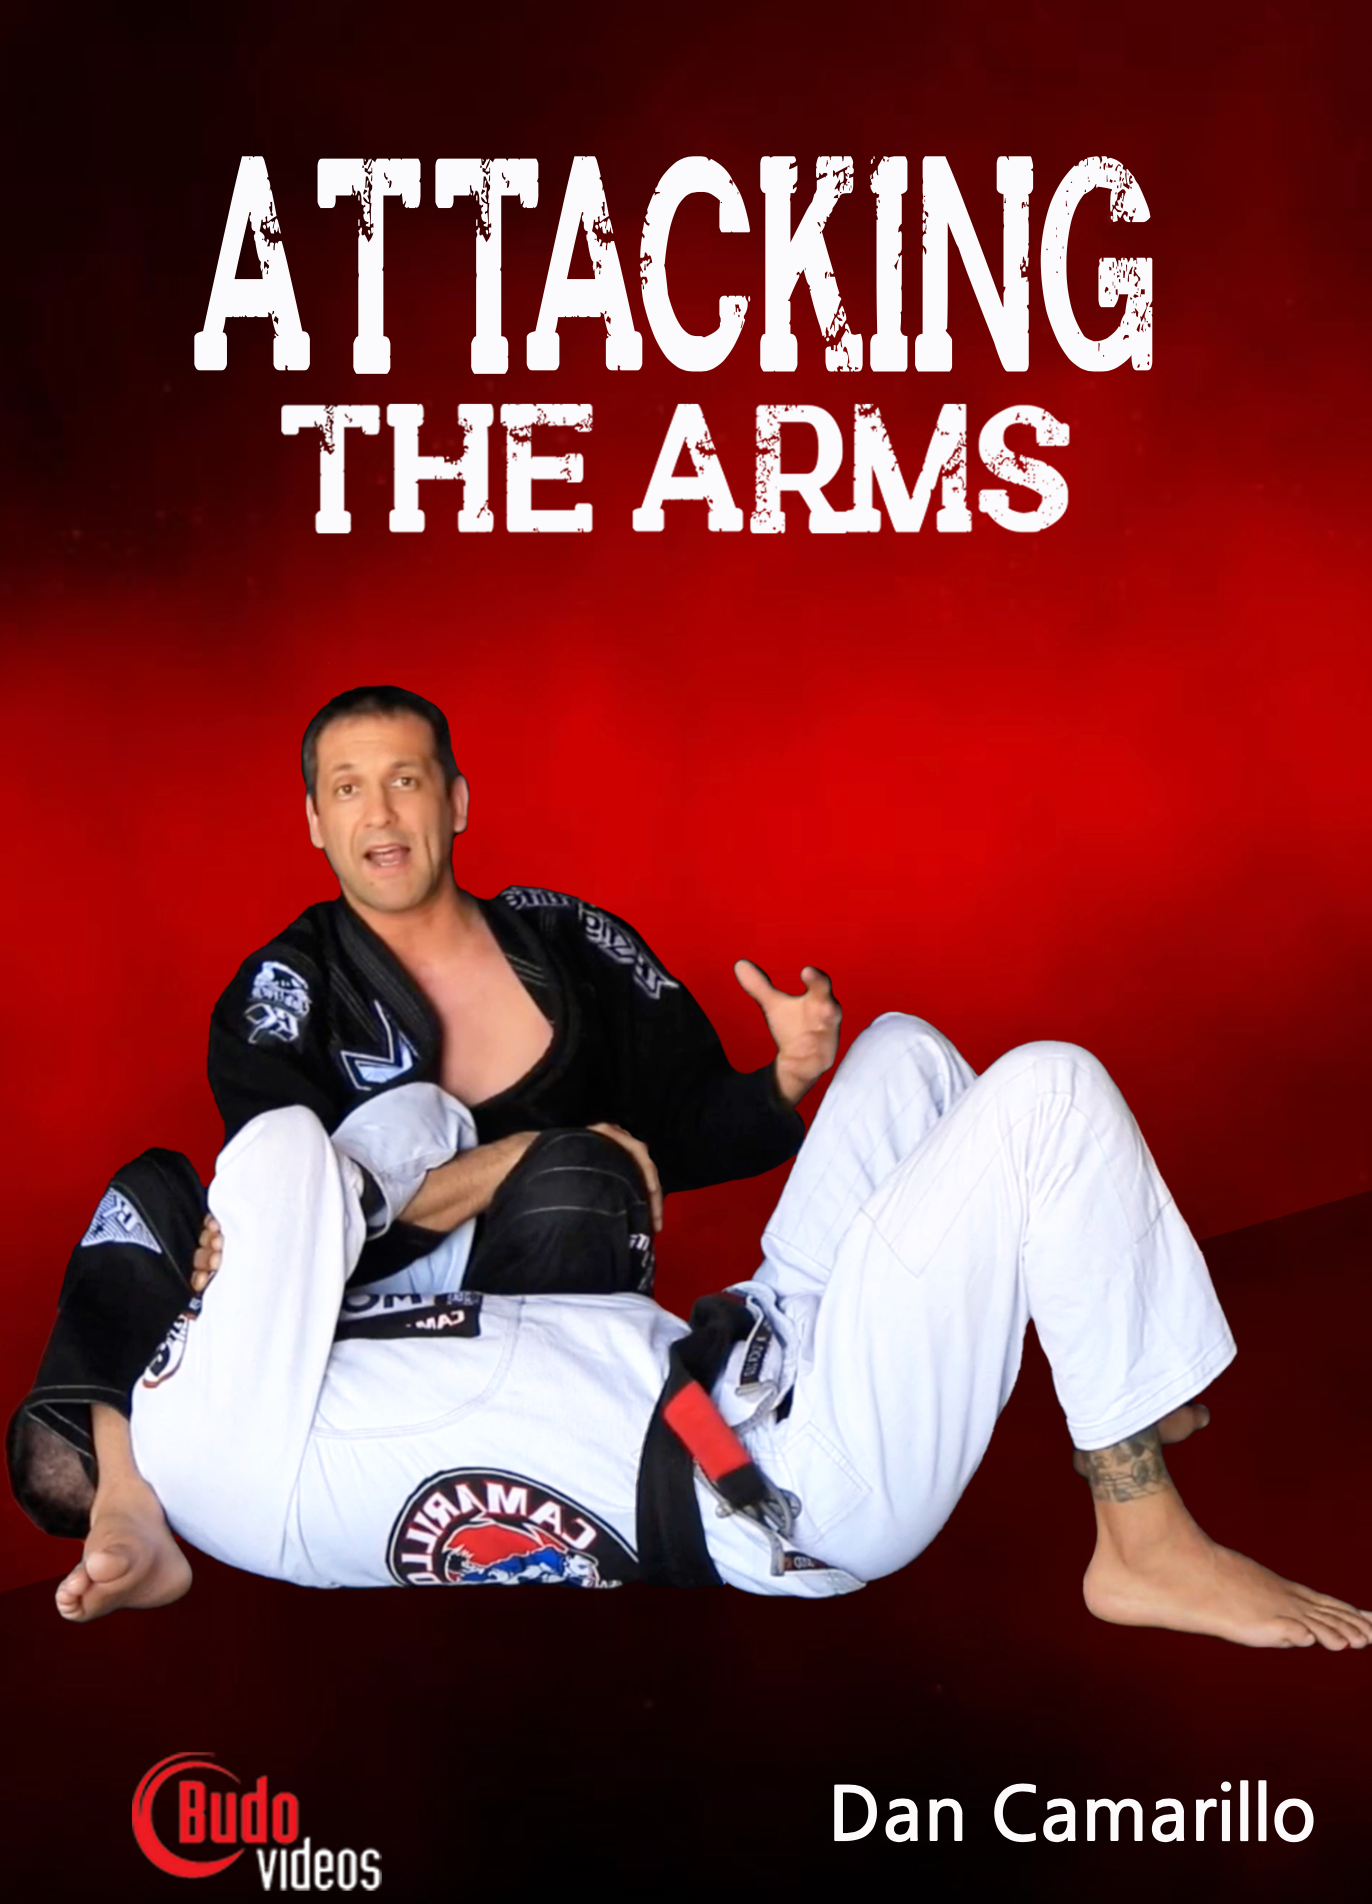 Attacking the Arms DVD by Dan Camarillo